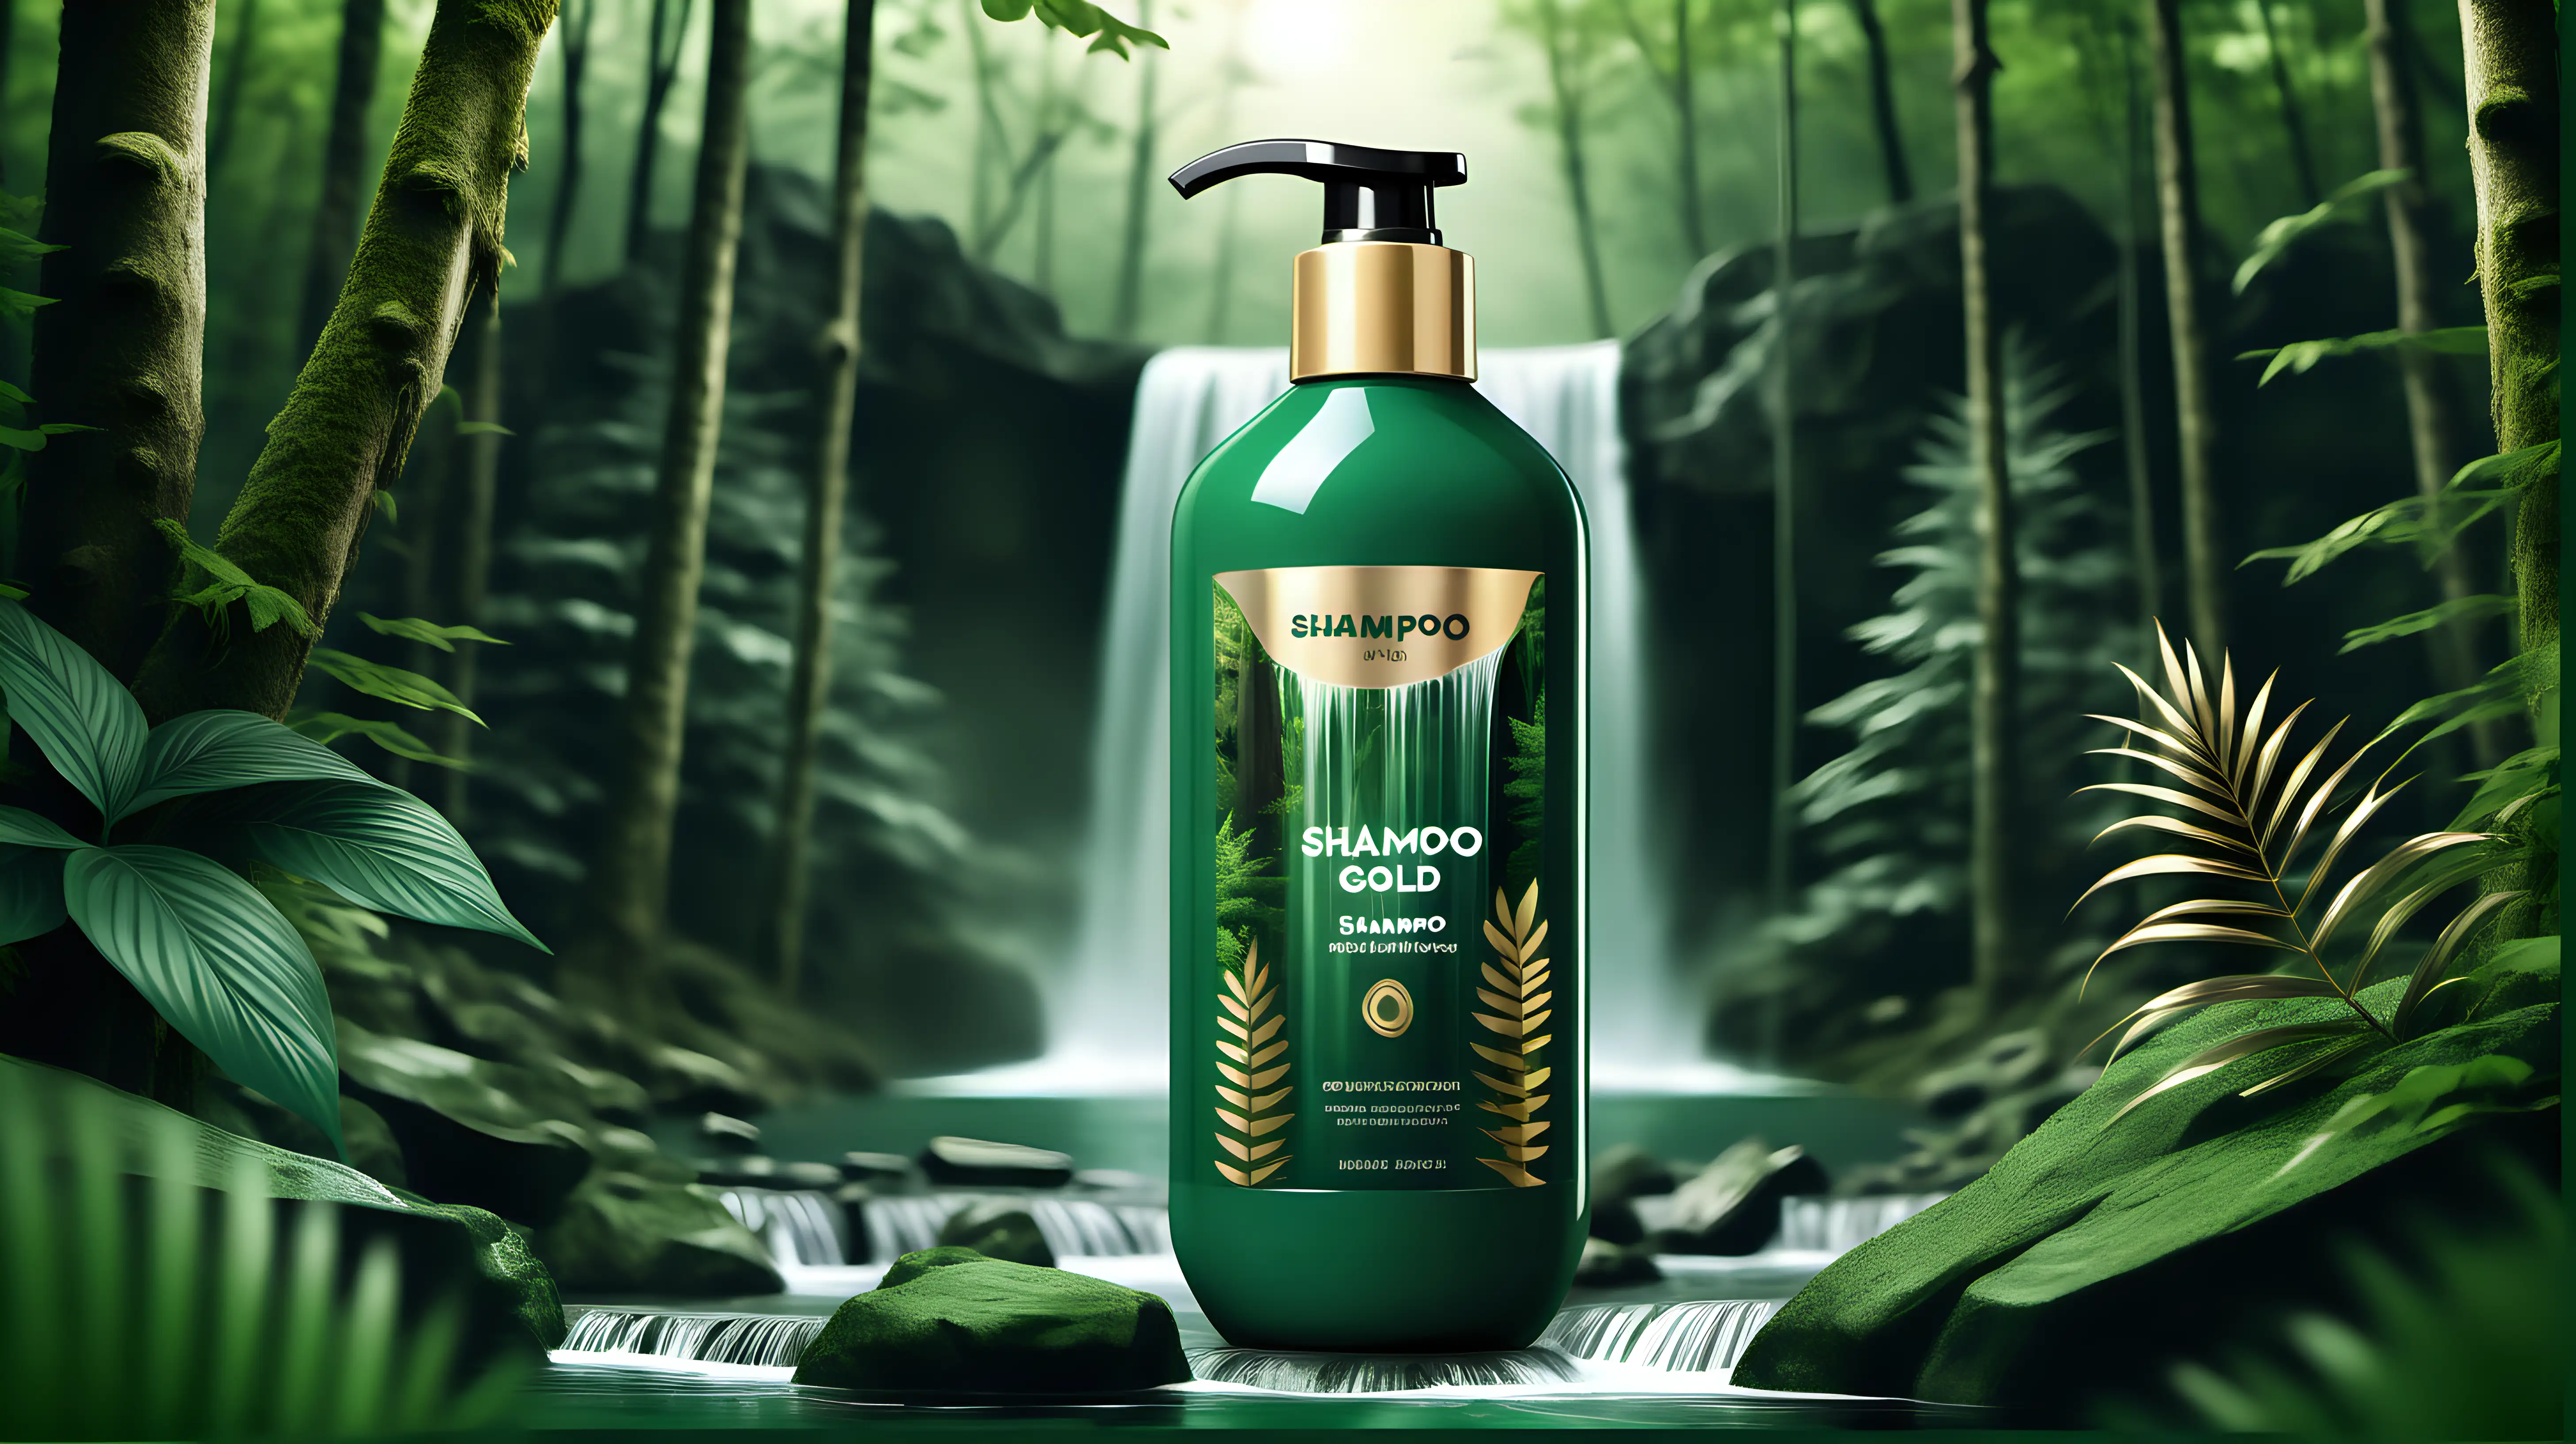 Enchanting Forest Waterfall Scene with Golden Accents and a Central Shampoo Bottle